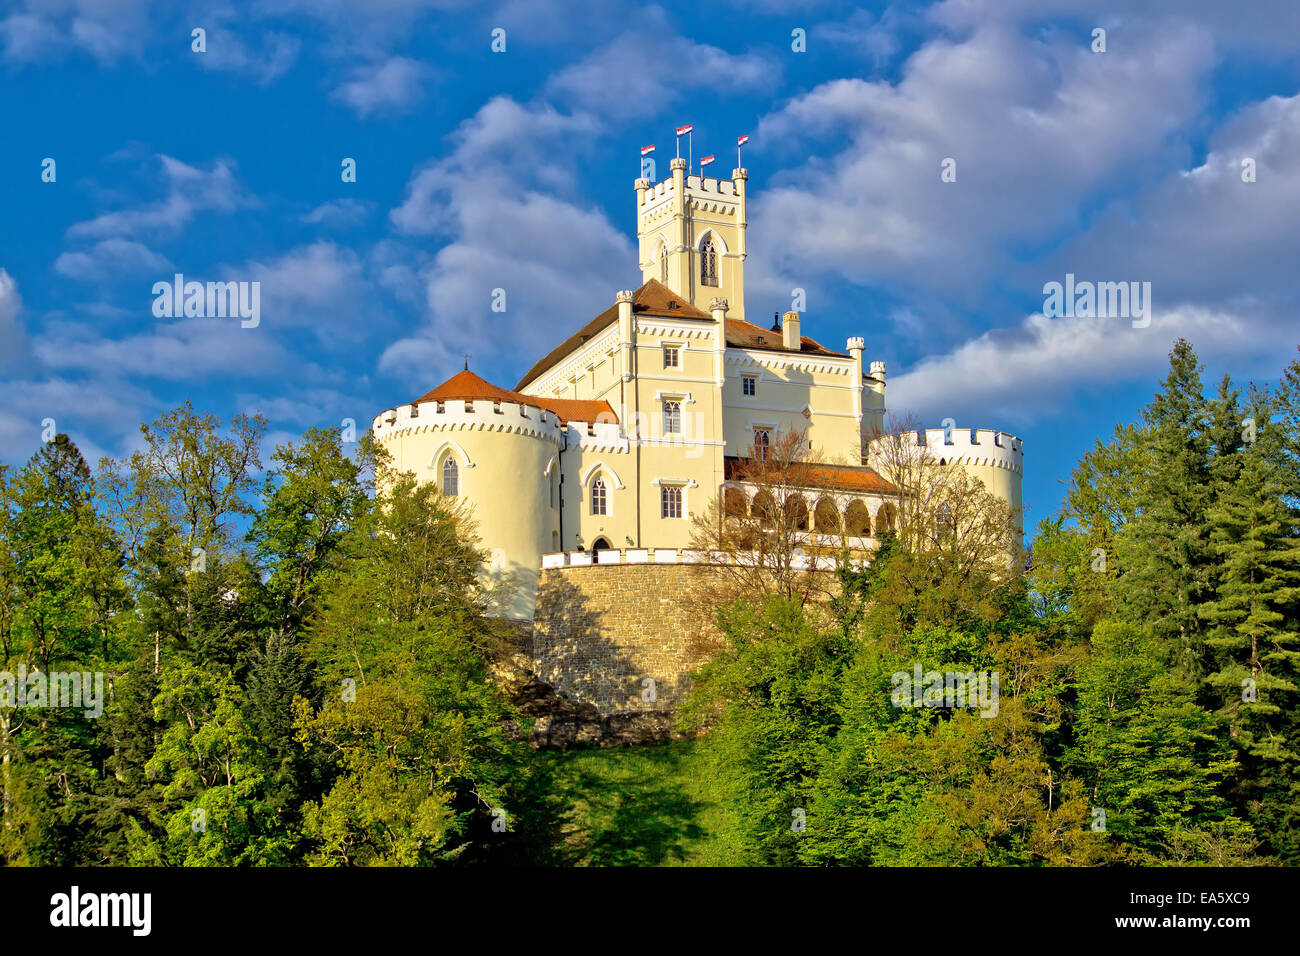 Colorful castle on green hill Stock Photo